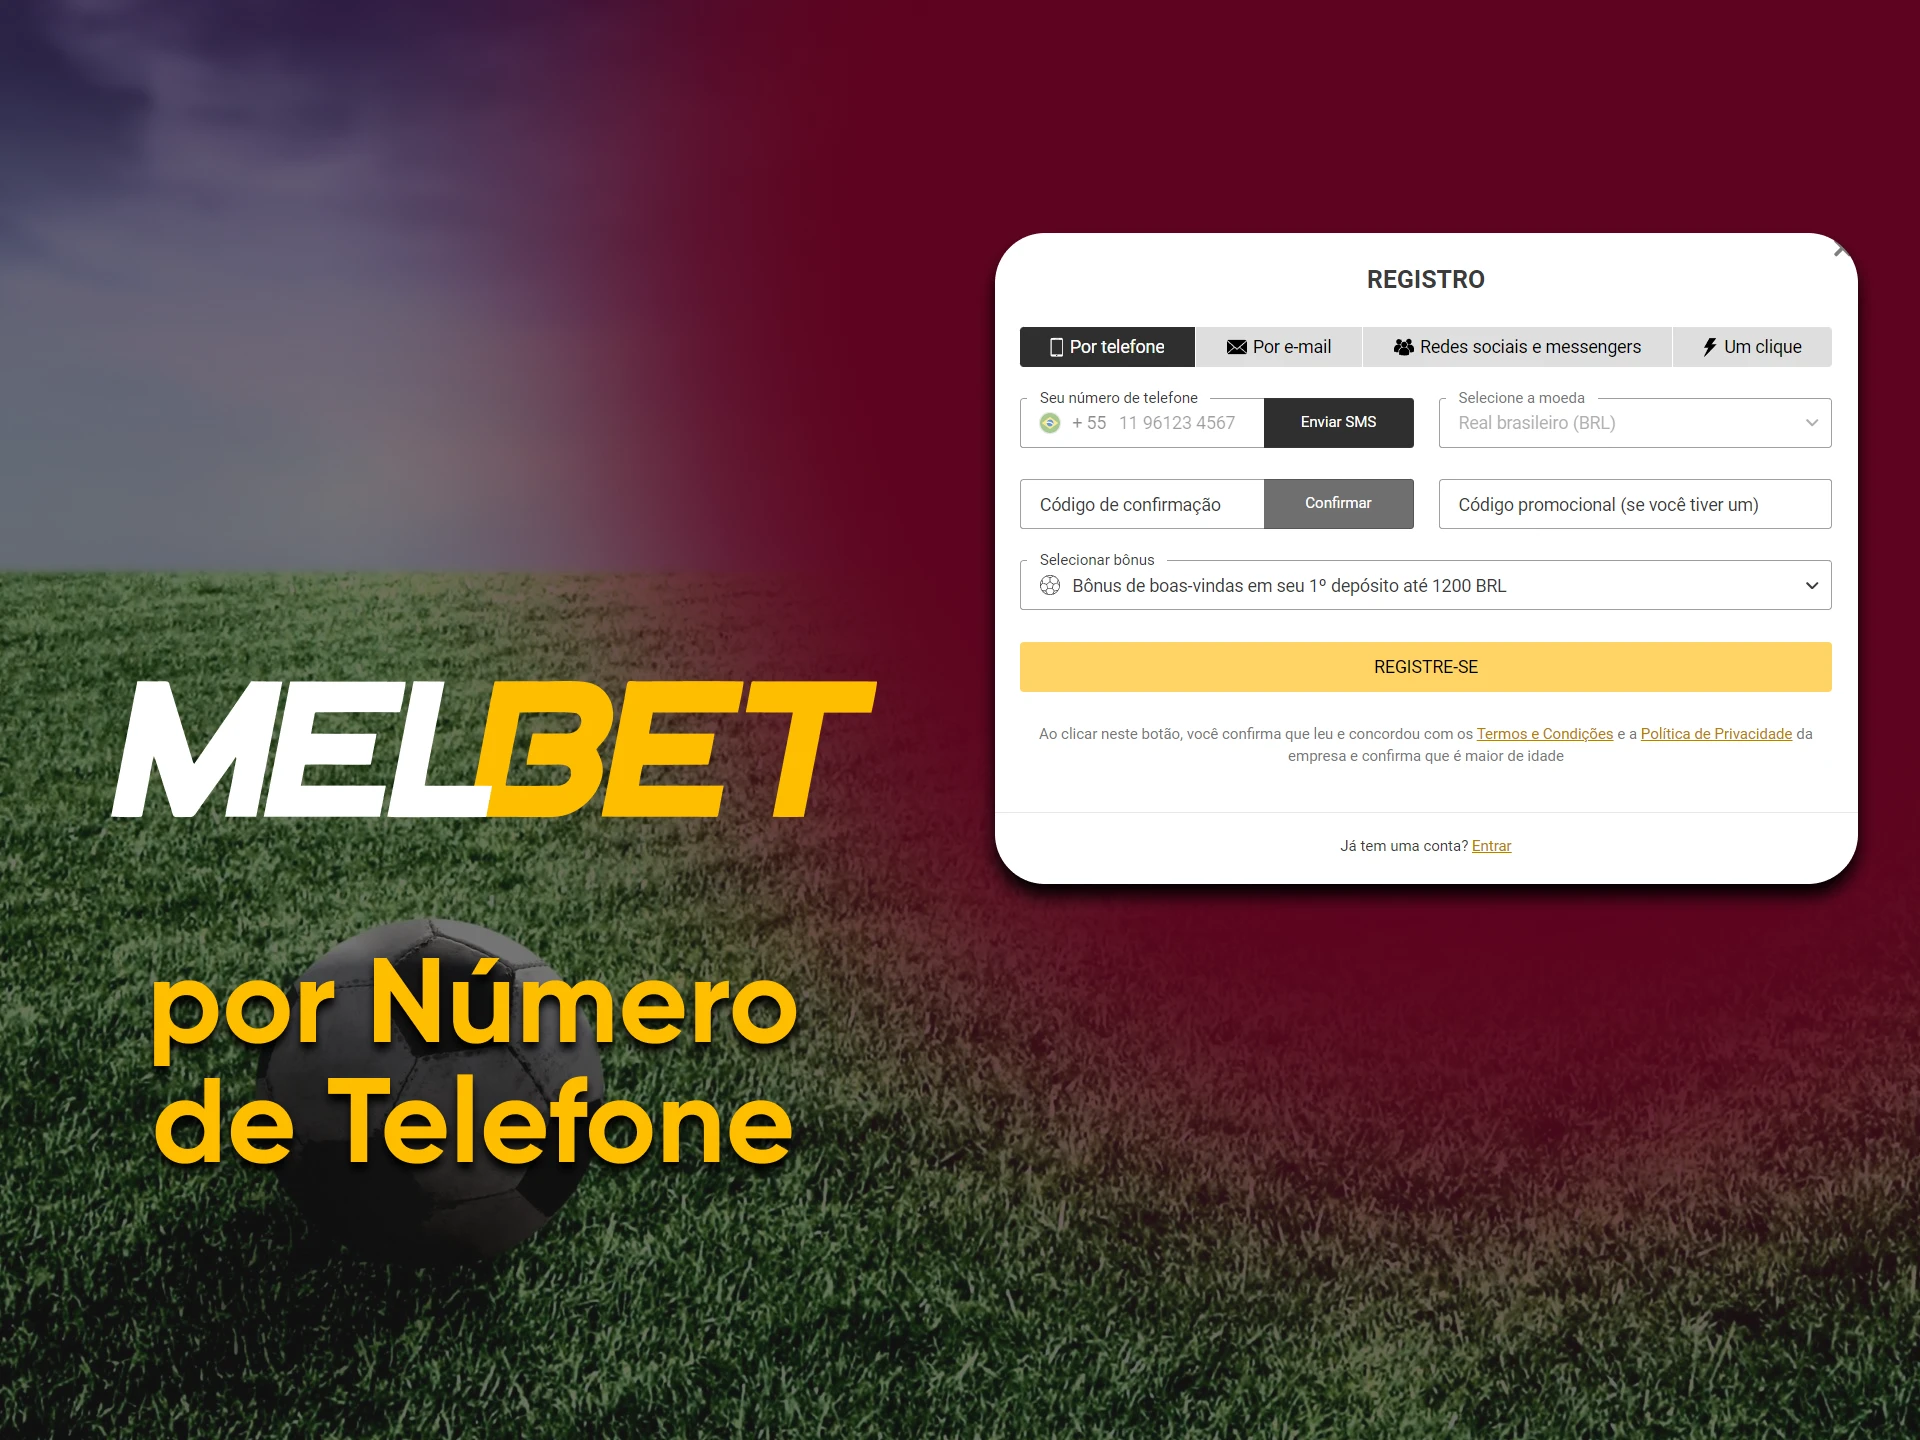 Register with Melbet by phone number.